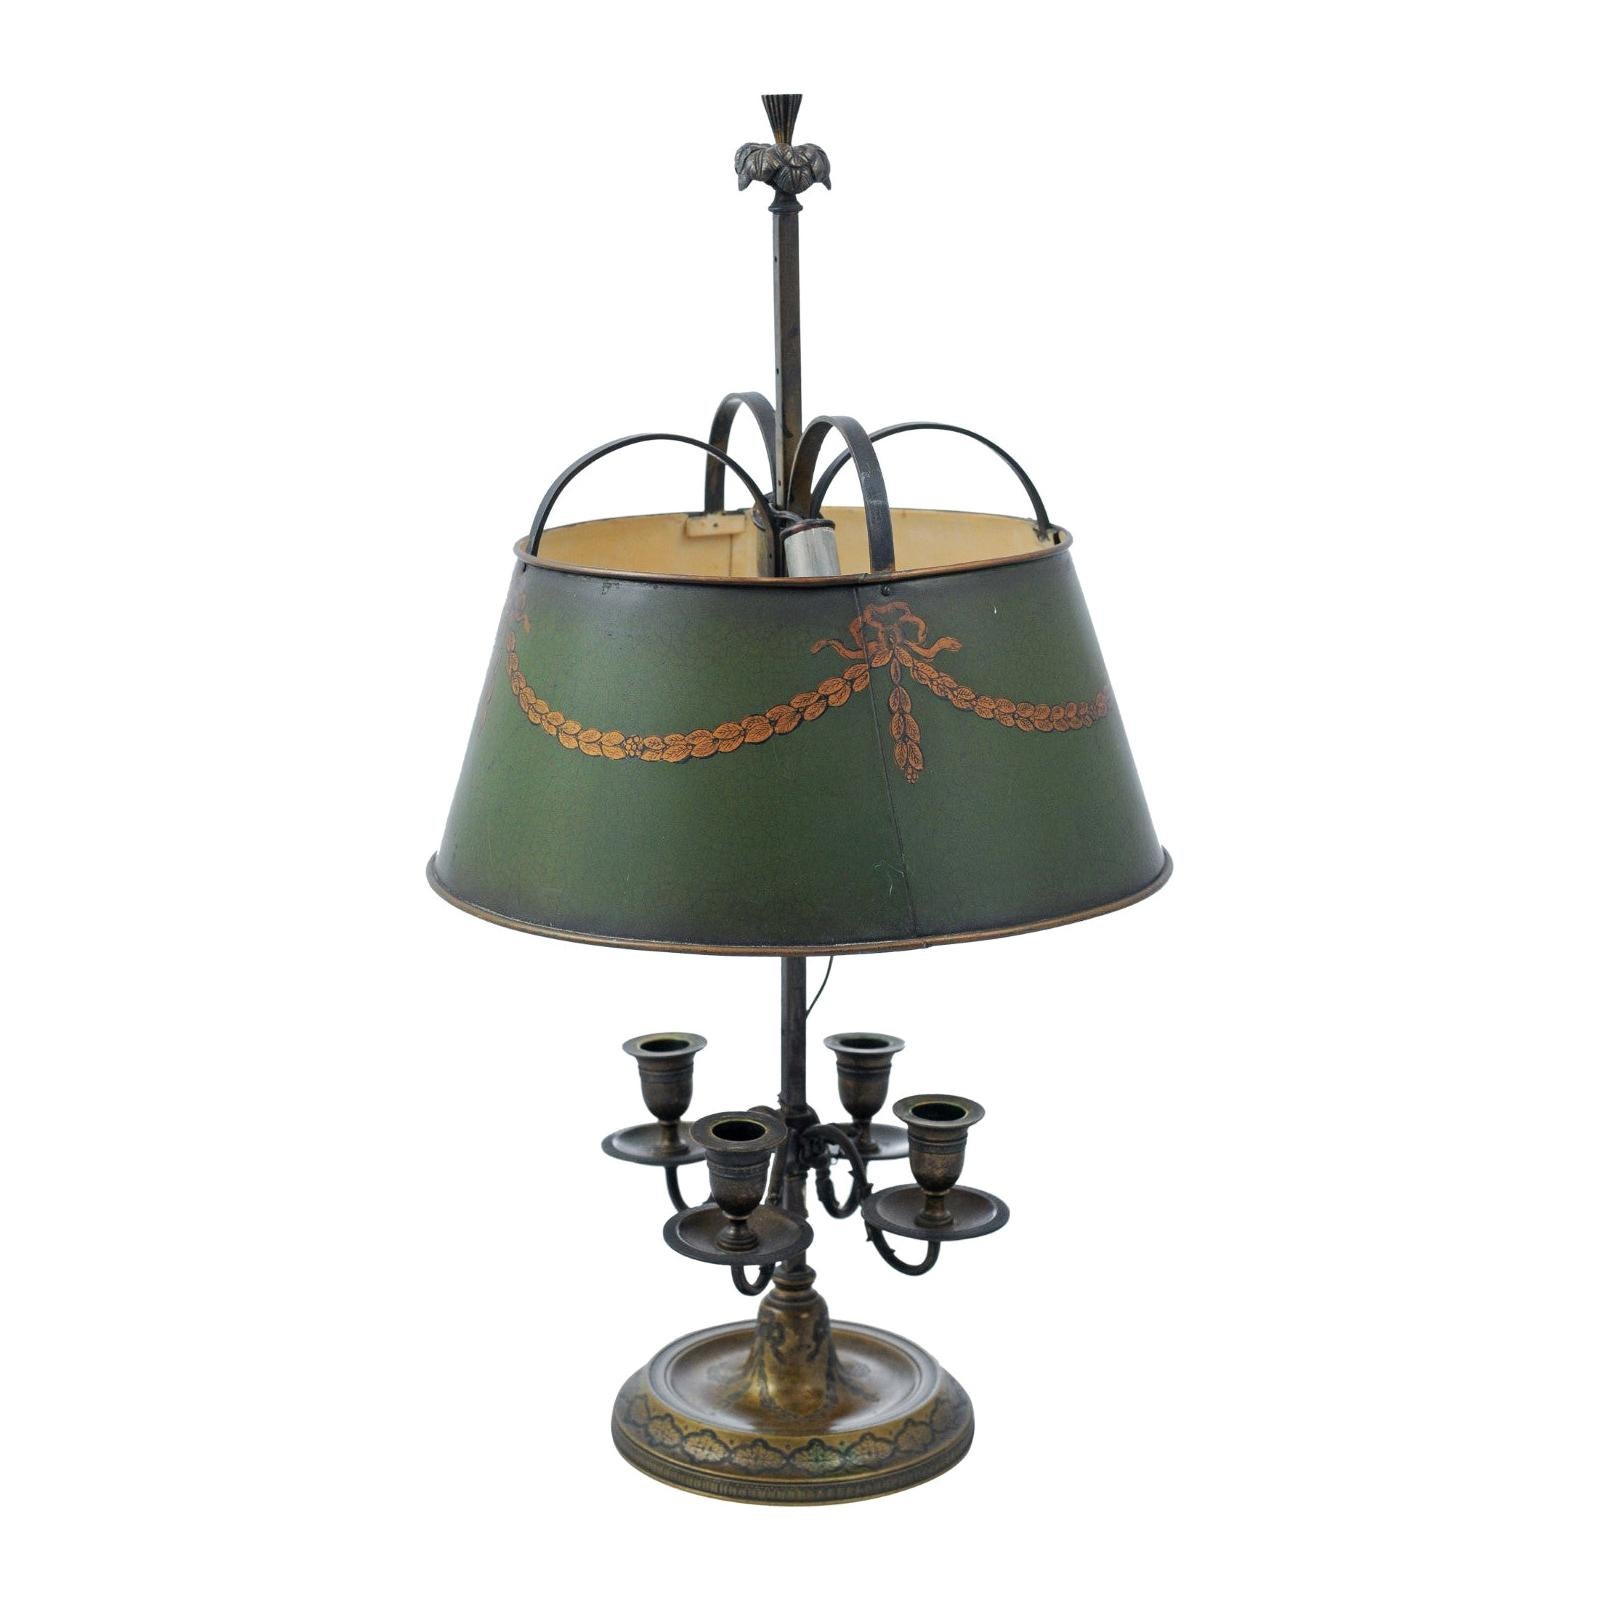 French 1850s Napoléon III Green Painted Tôle Table Lamp with Garland Motifs